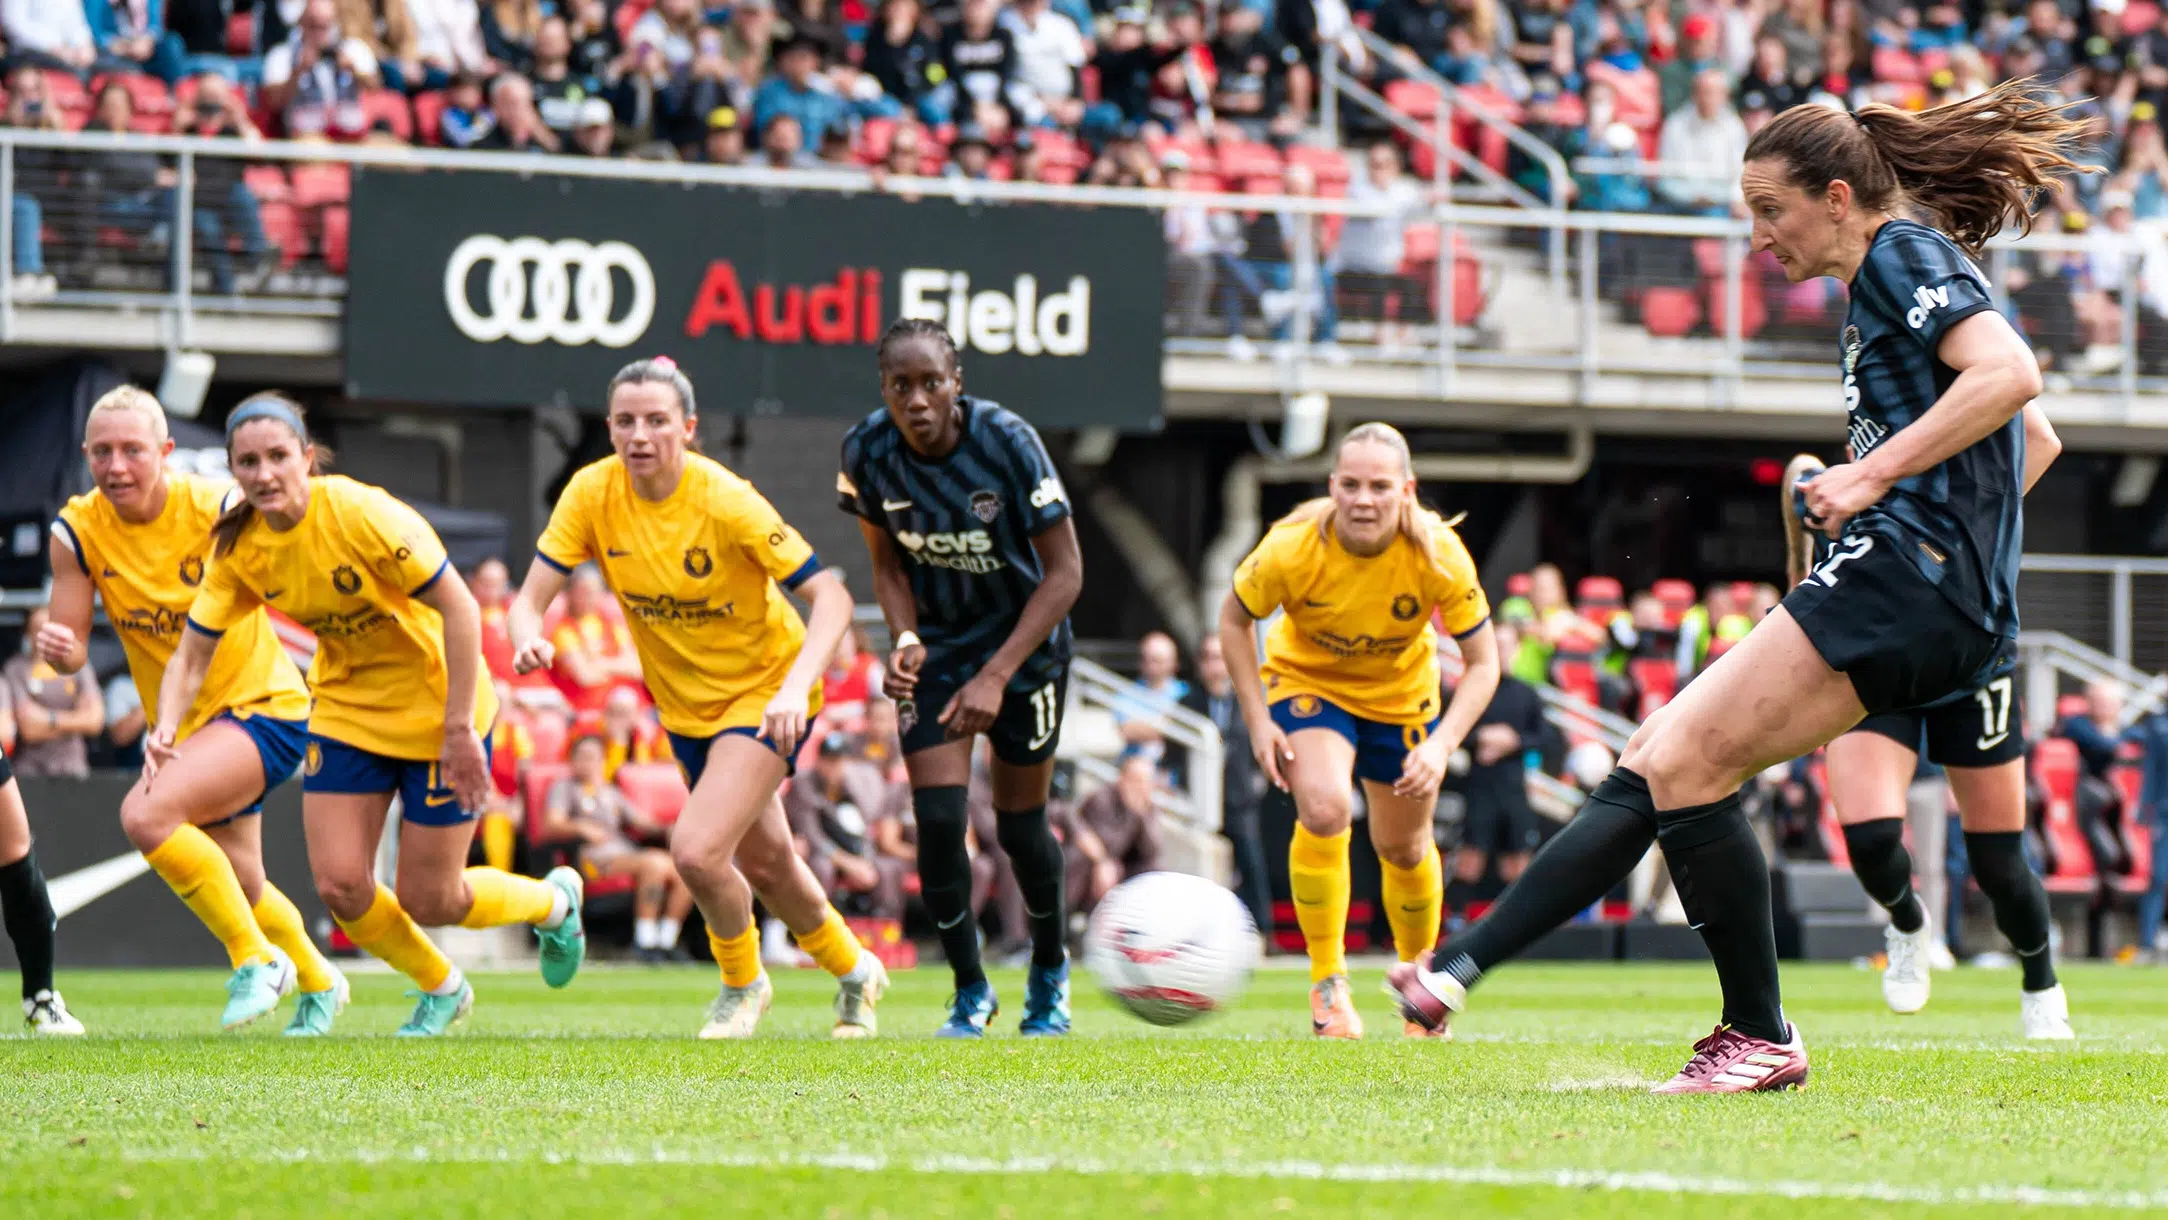 Andi Sullivan takes a penalty kick. In the background, four Utah Royals players and Ouleye Sarr are lined up and prepared to start running toward goal.